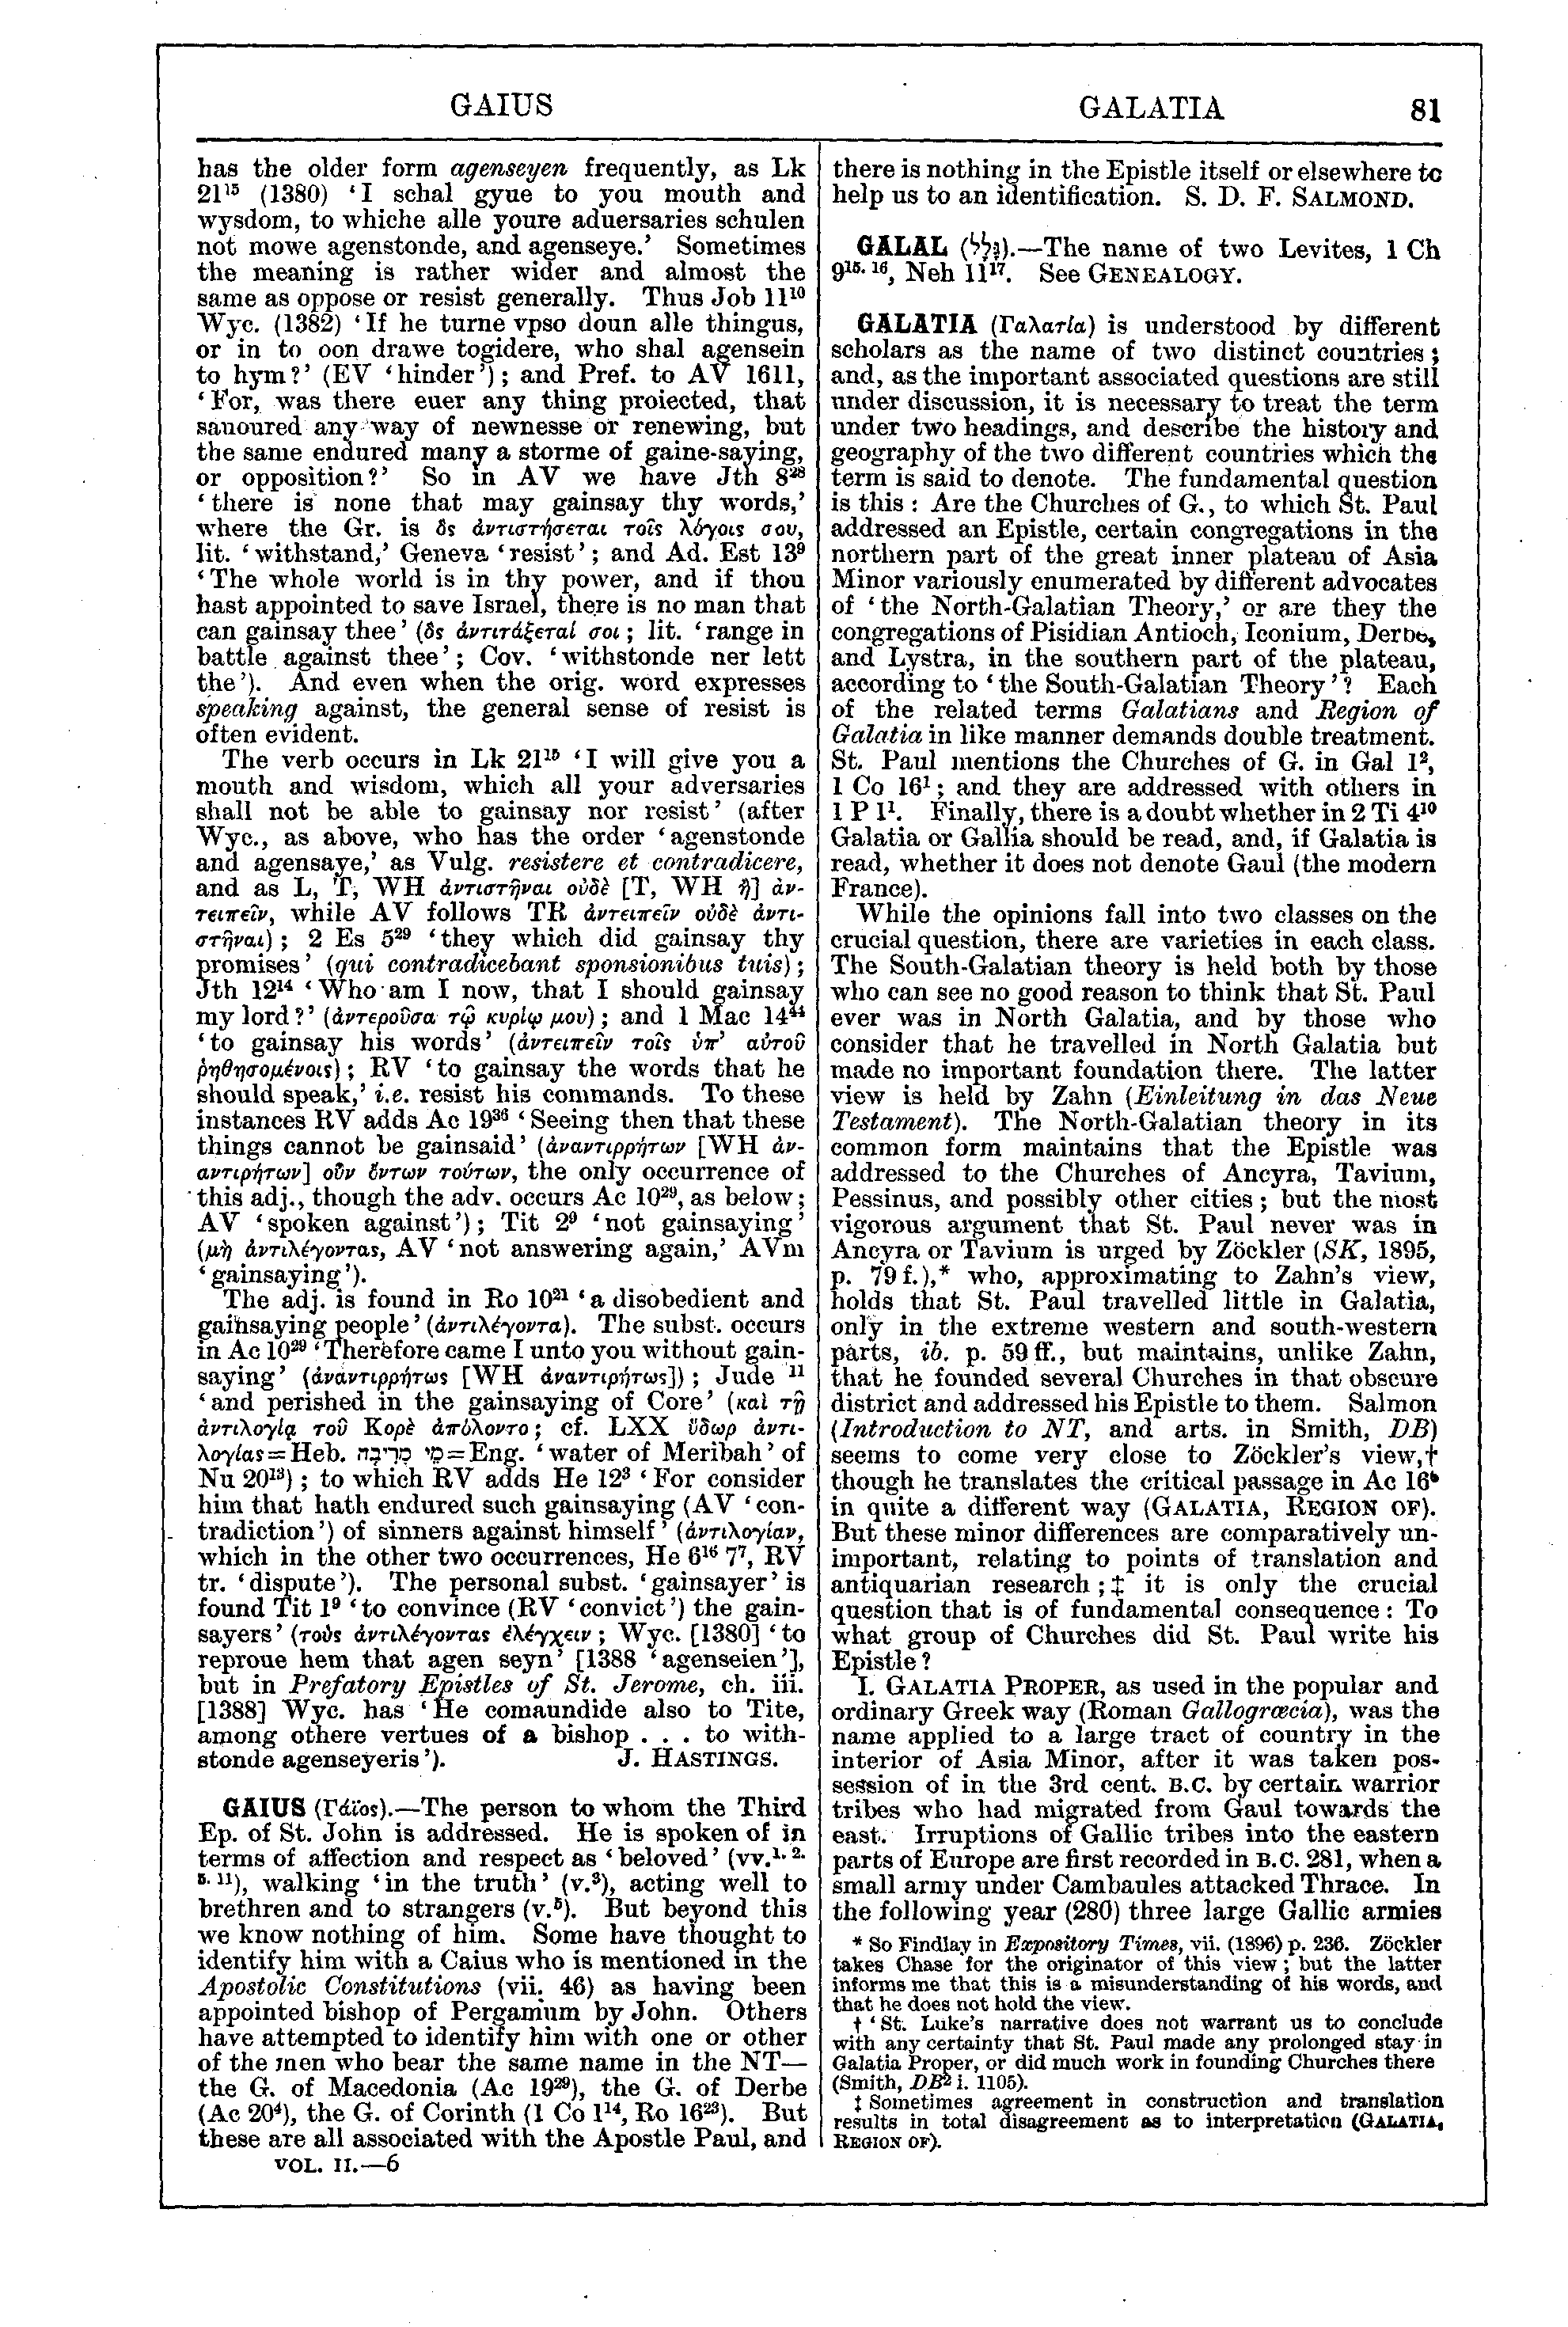 Image of page 81